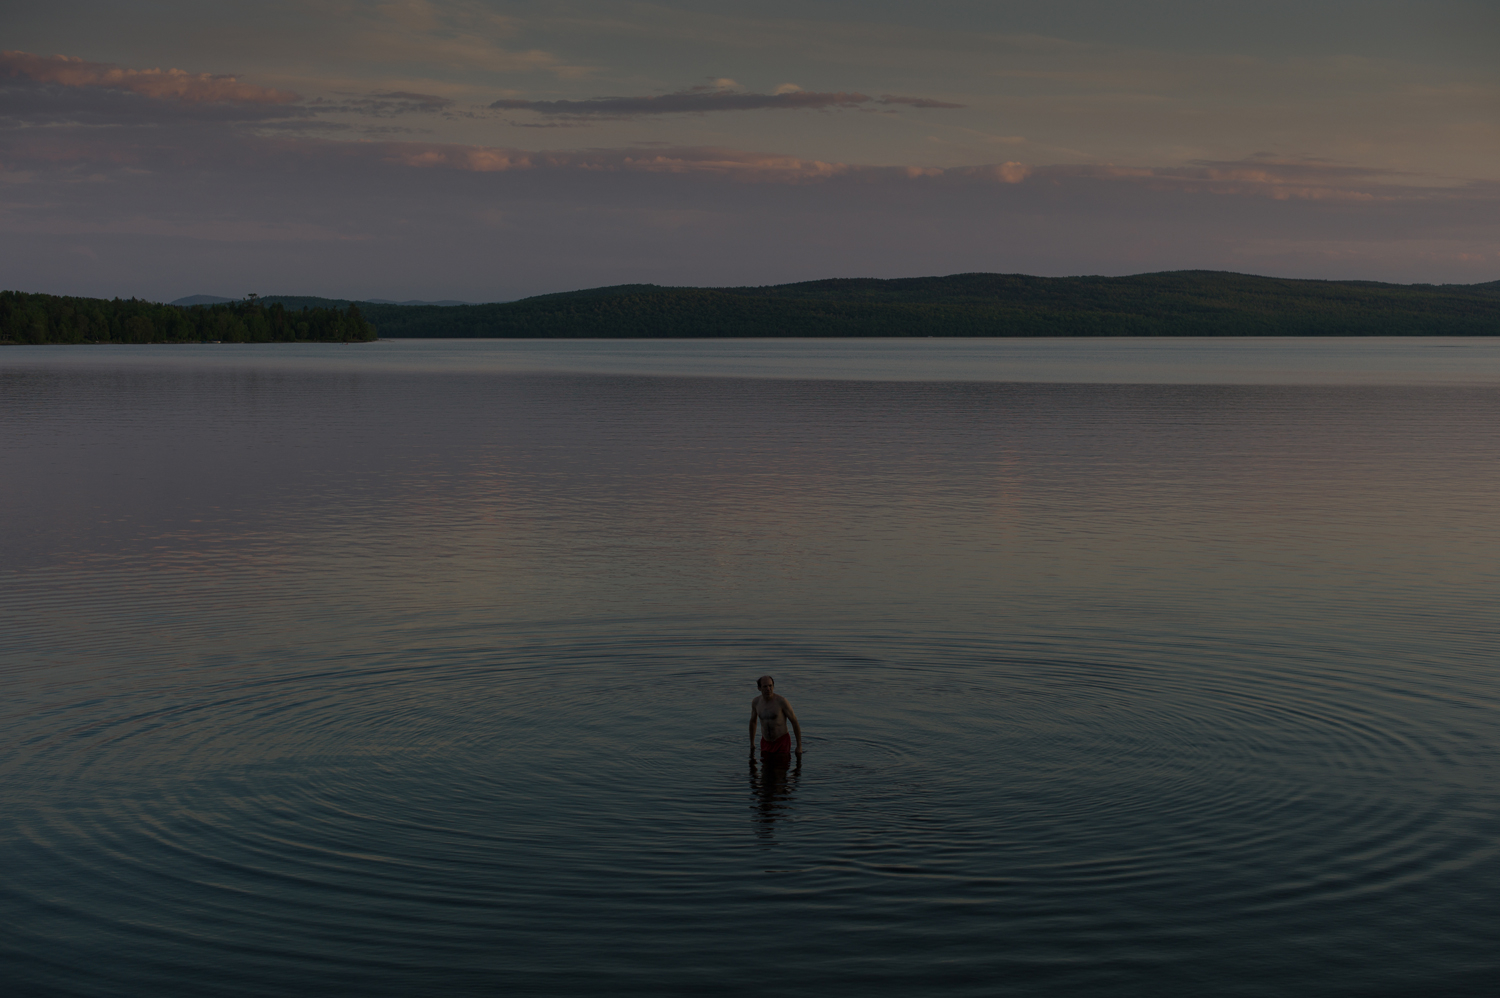     Michel Huneault, Jacques. First swim of the year in Lac Mégantic, June 2014

